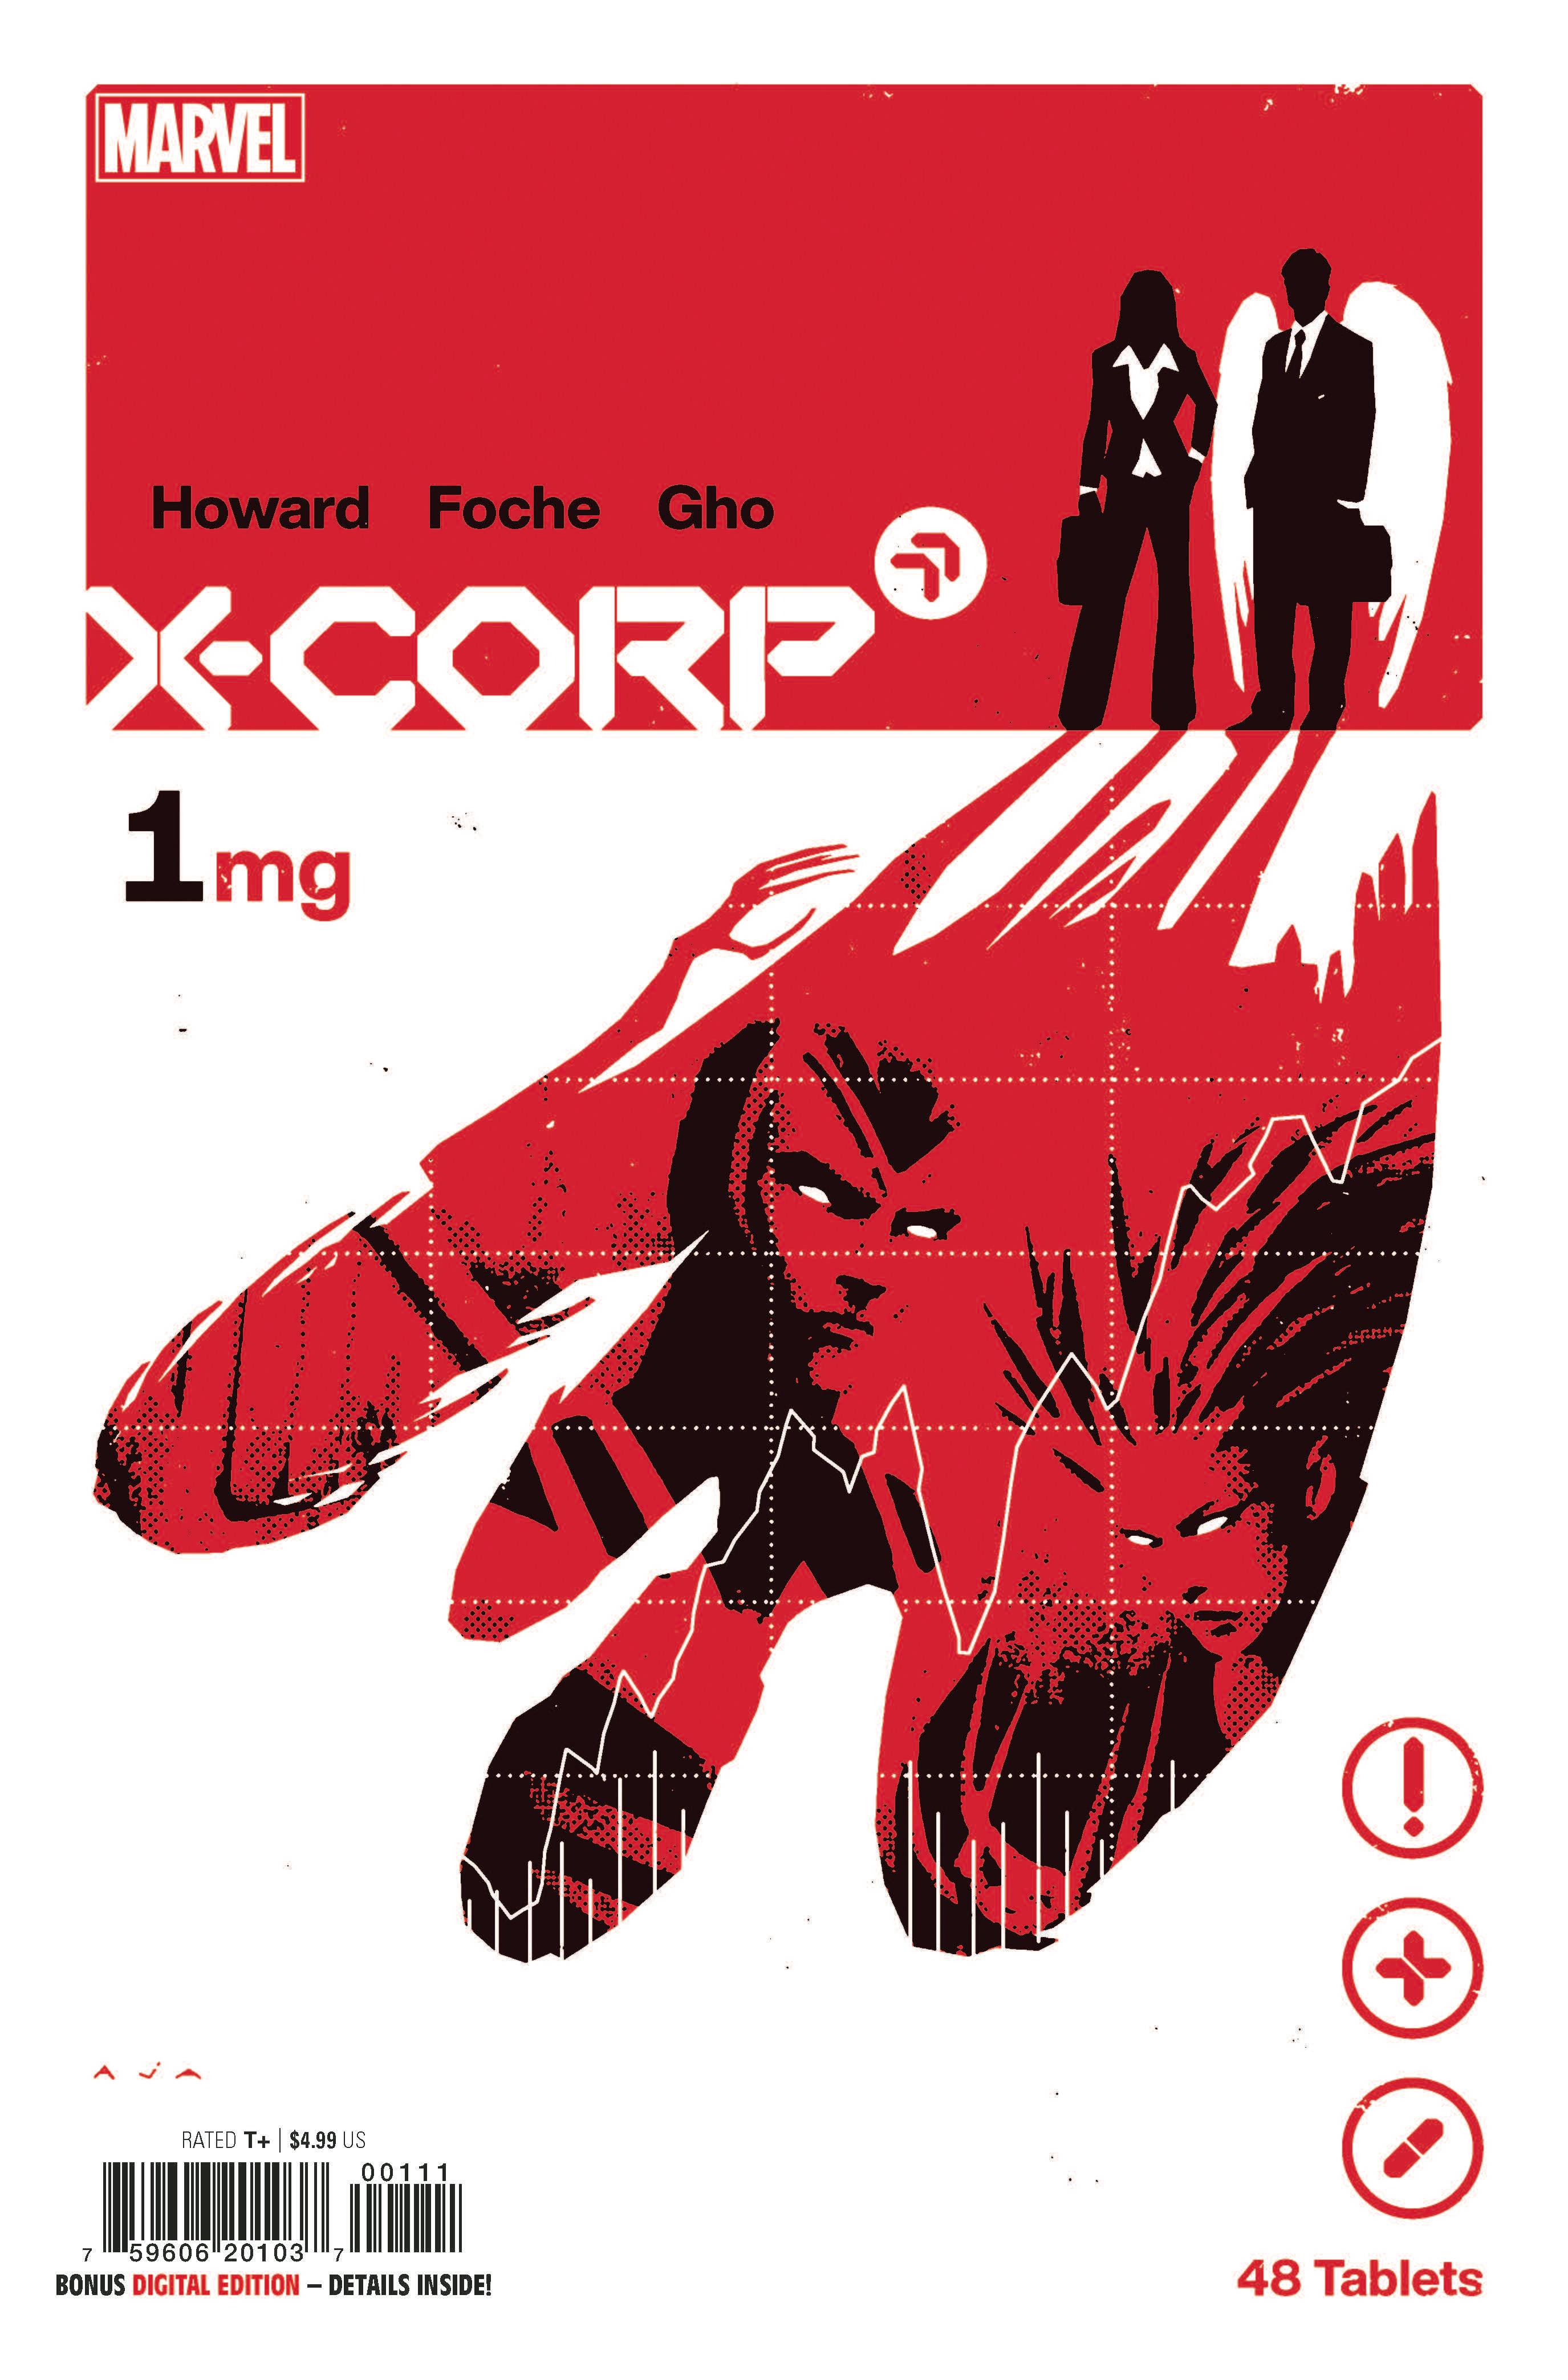 Photo of X-Corp Iss 1 comic sold by Stronghold Collectibles